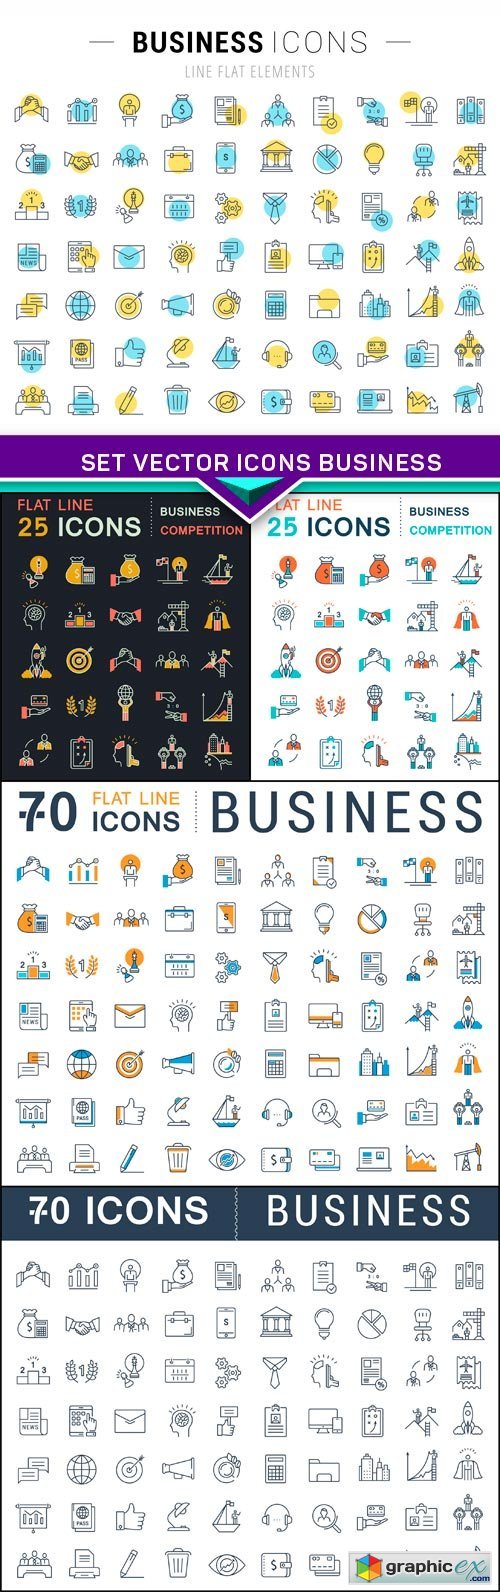 Set Vector Icons Business 5X EPS